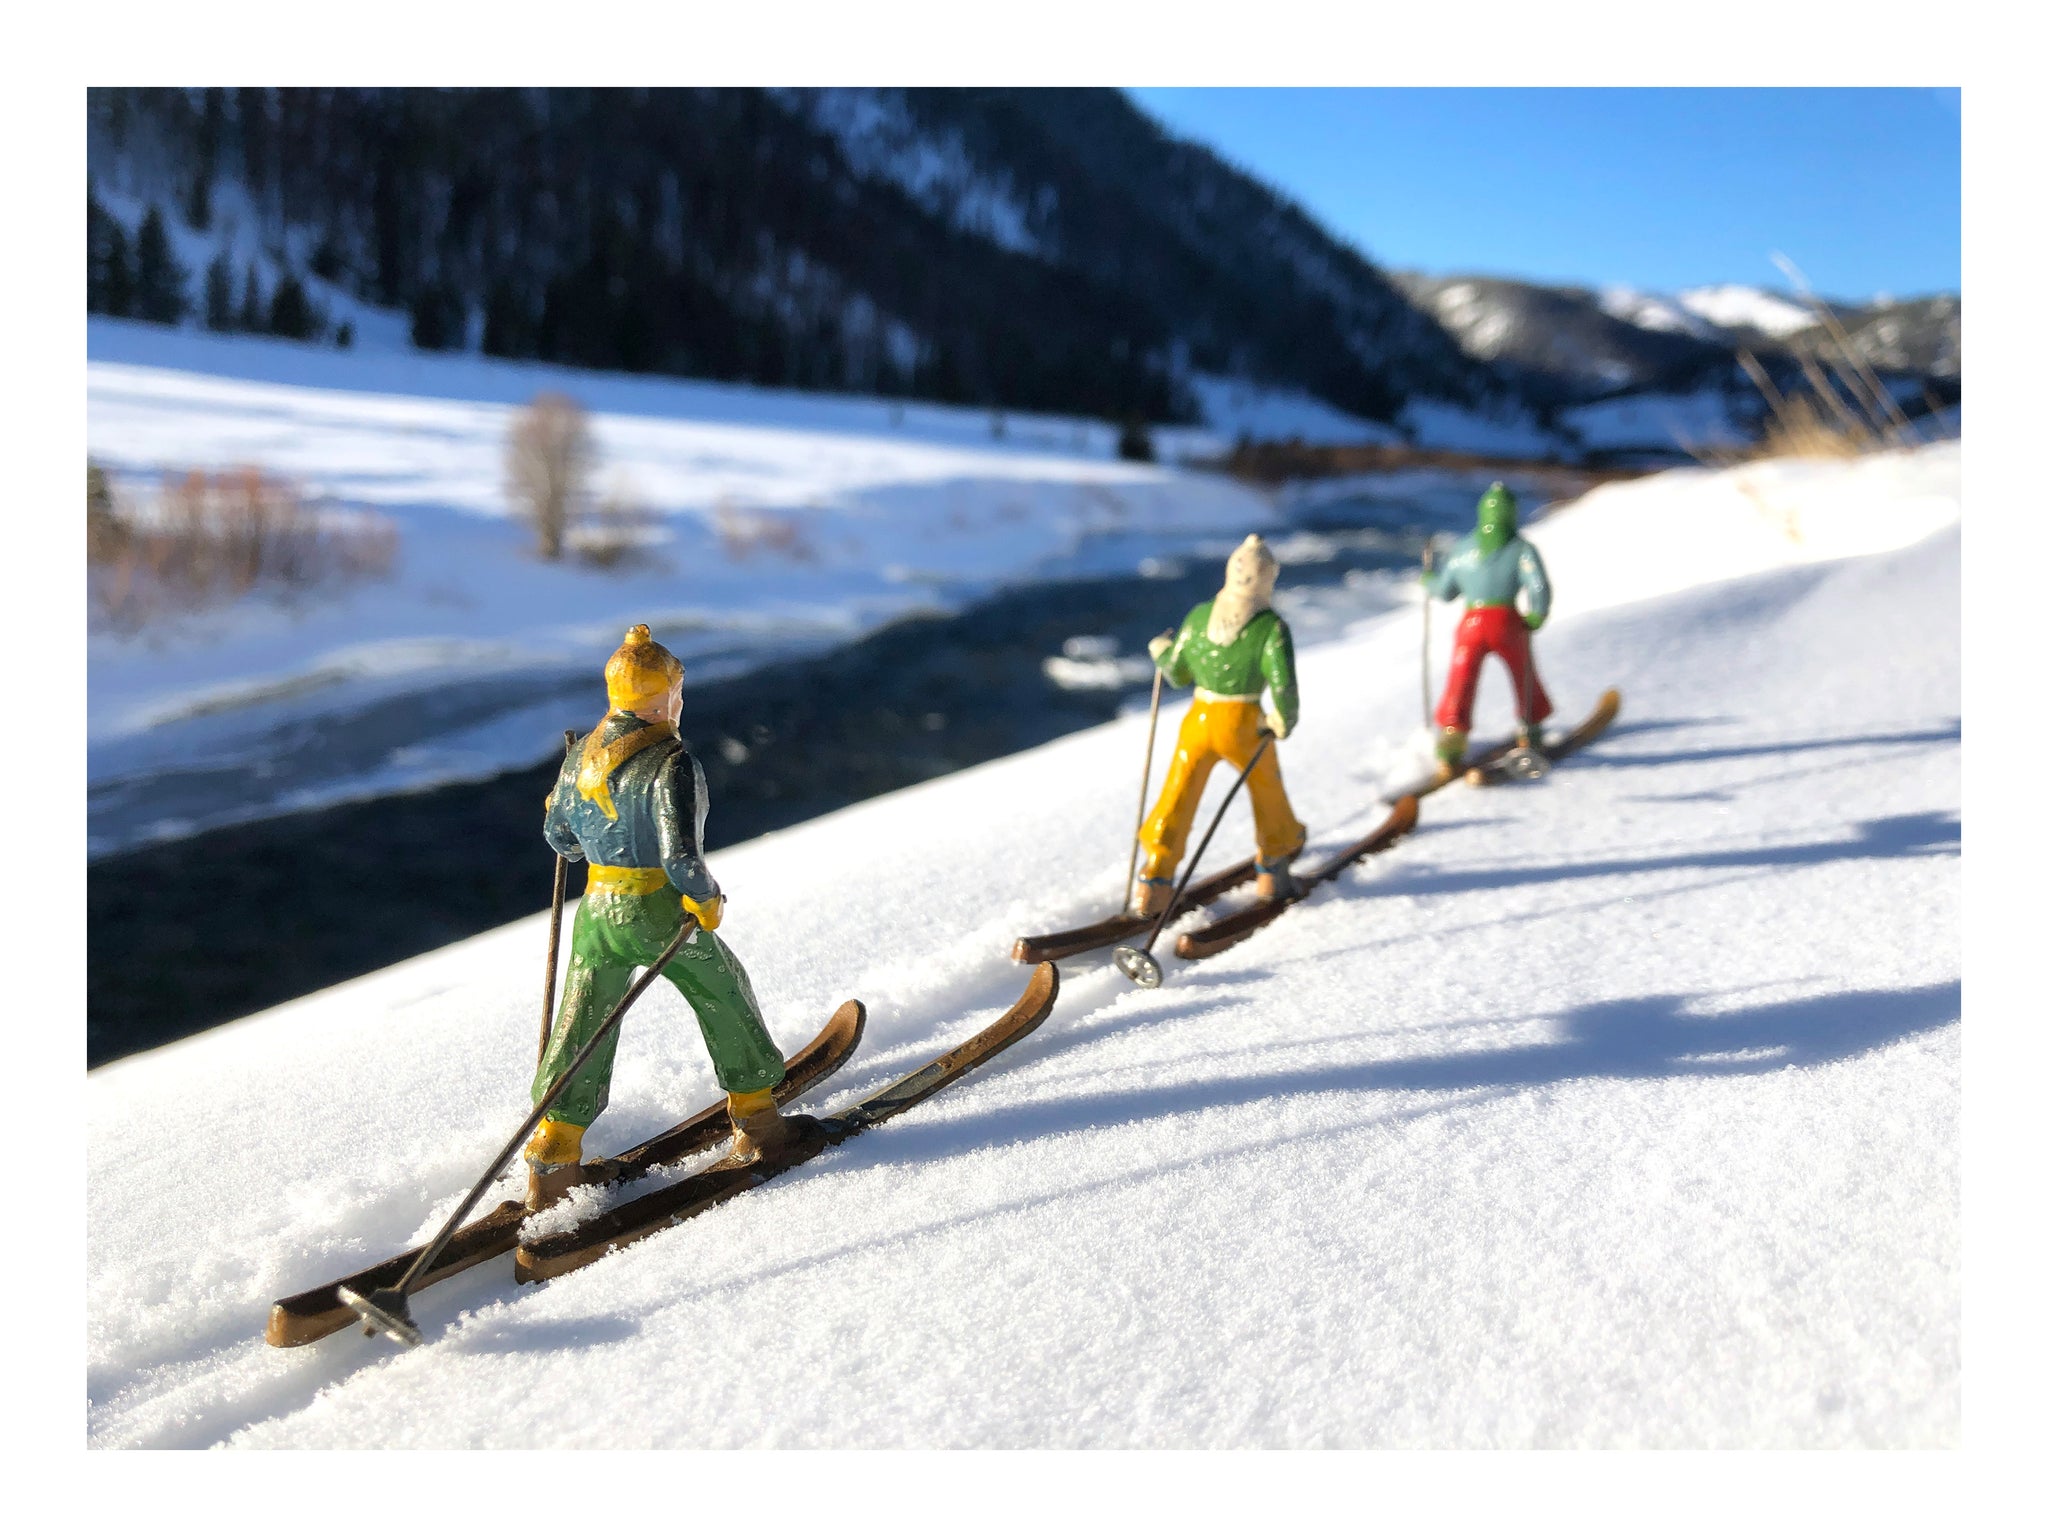 Toy skier photography by Hooey Mountain